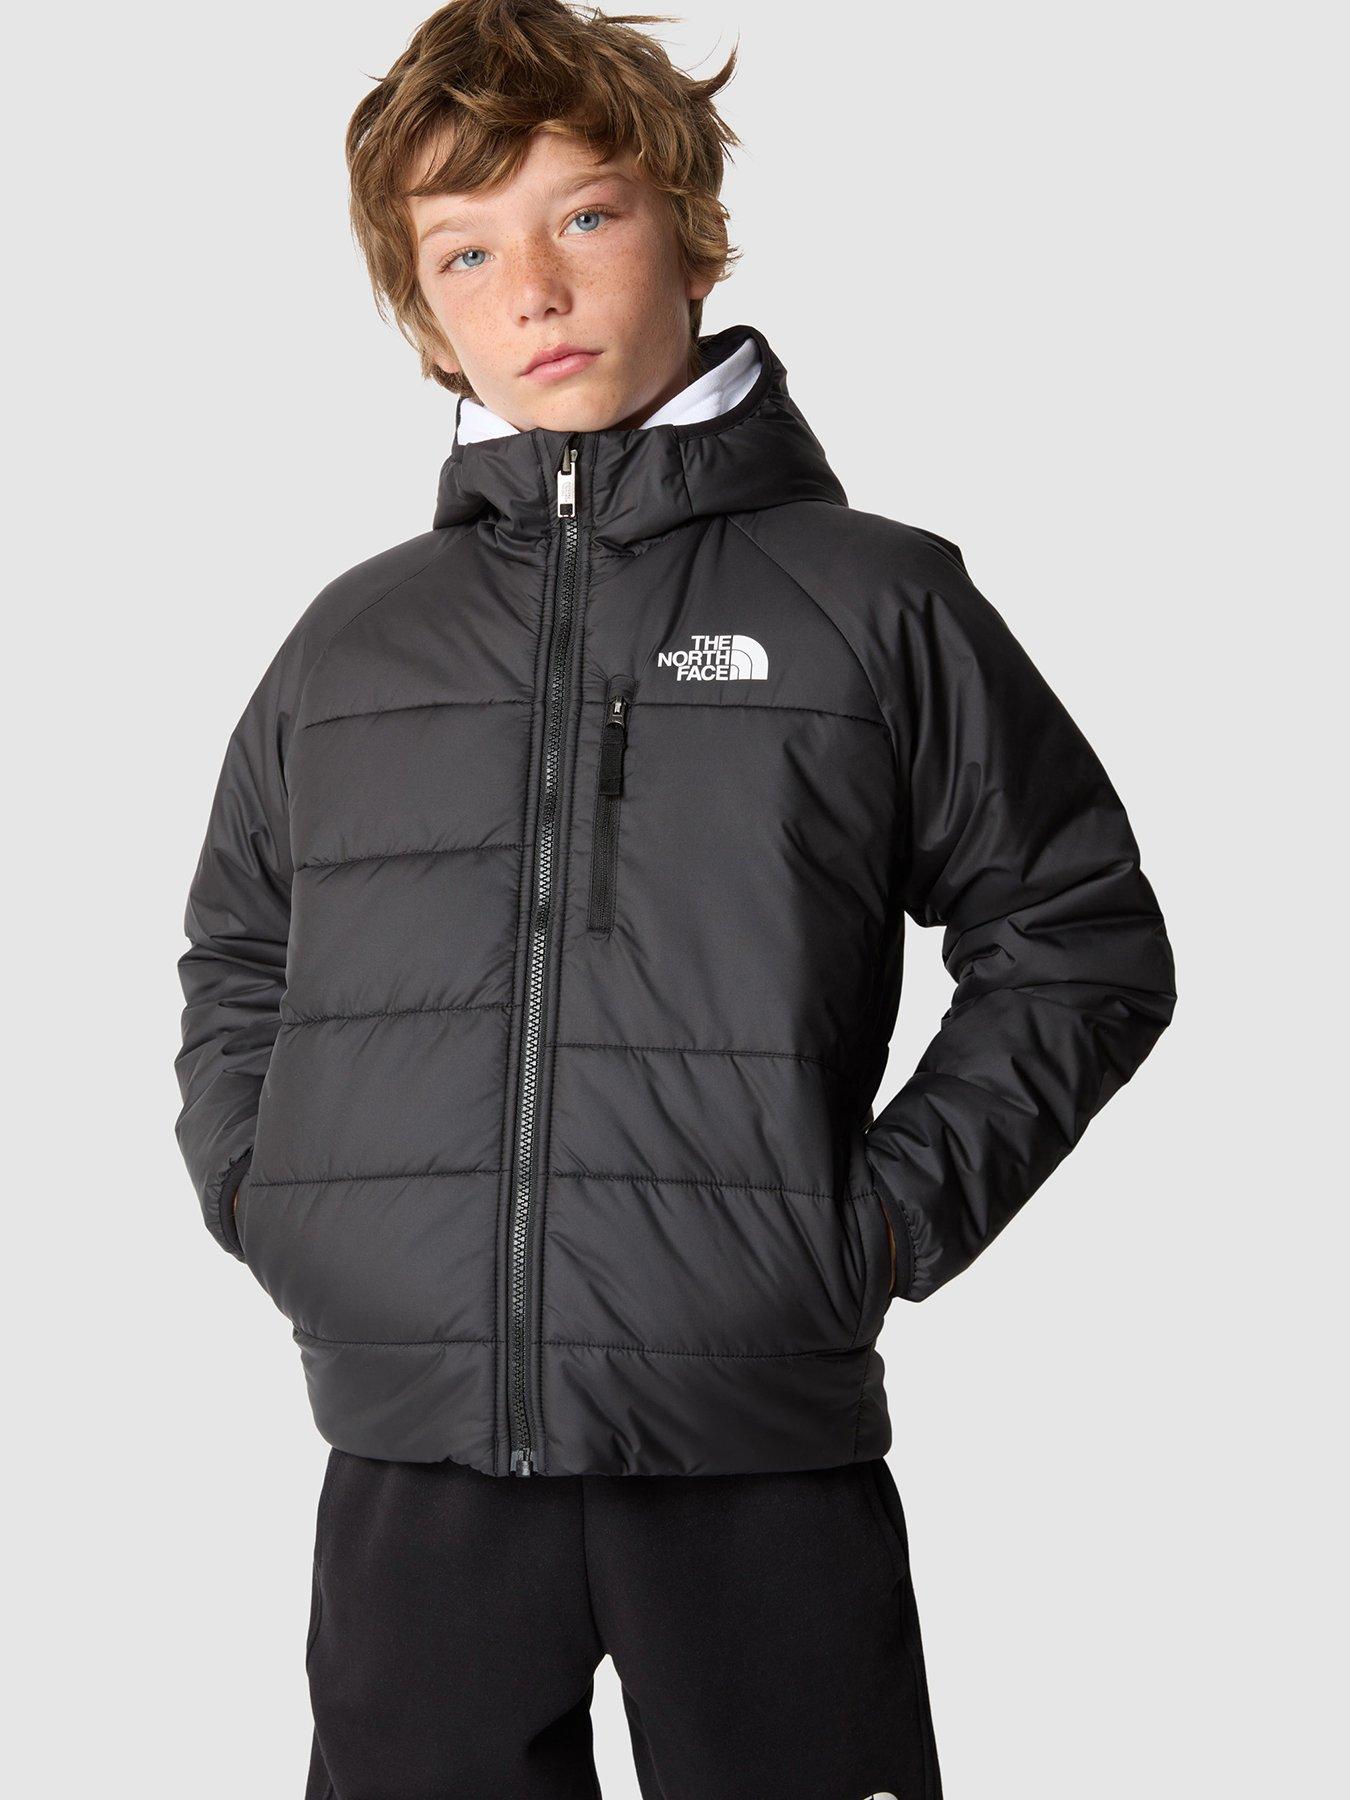 The North Face Men's Core Winter Warm Pro 1/4 Zip Hdy